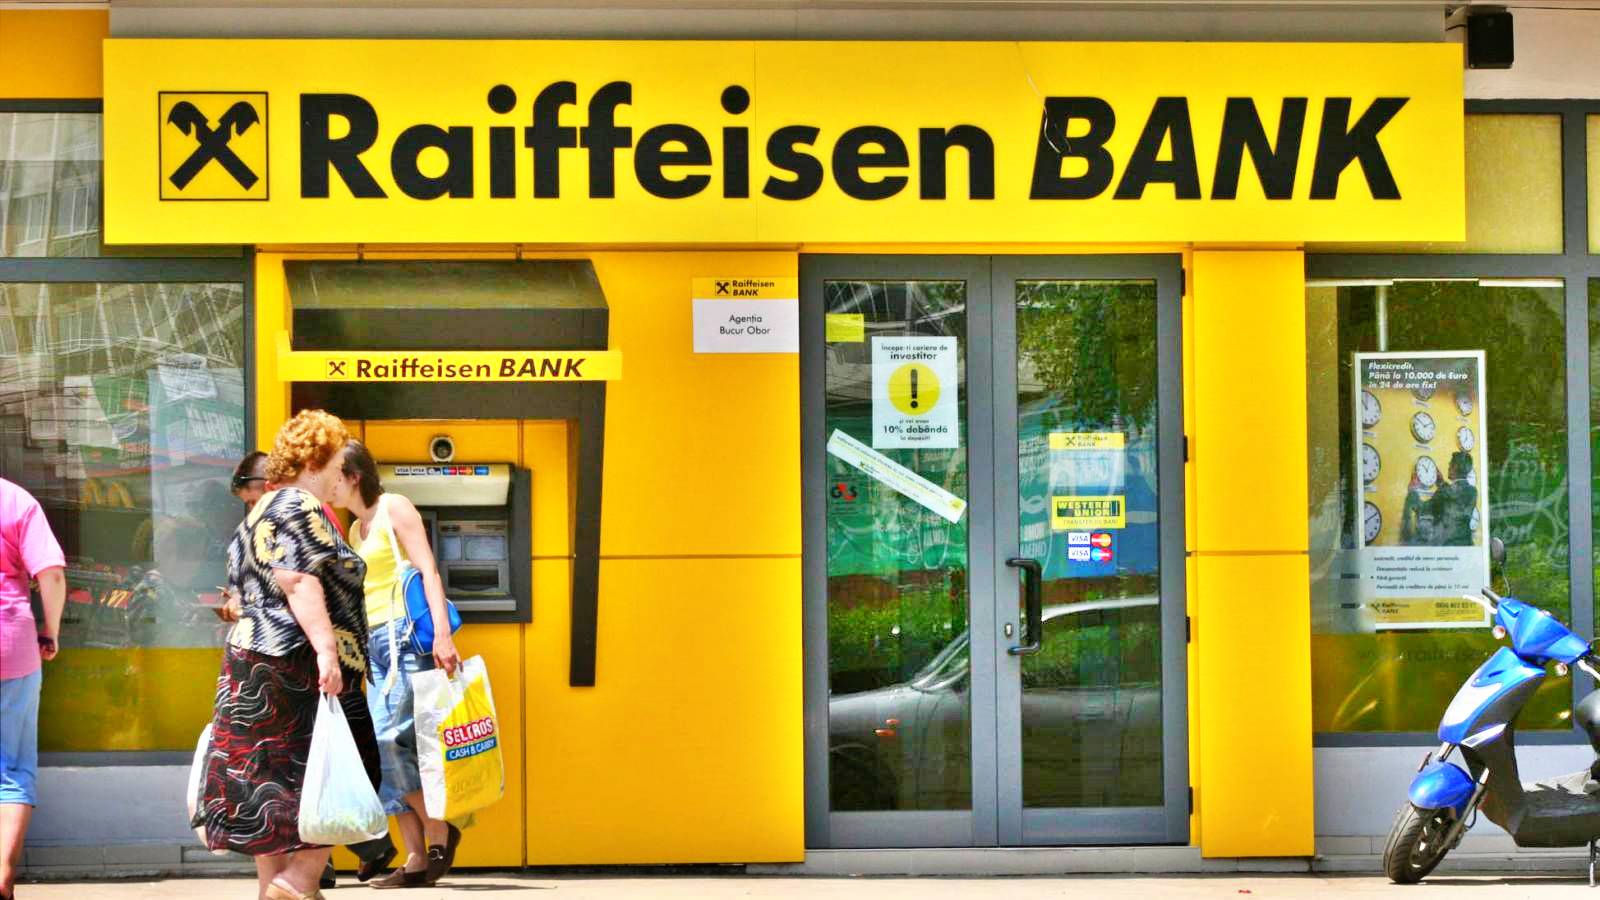 Raiffeisen Bank: Officially, Offering Customers for FREE Now thumbnail